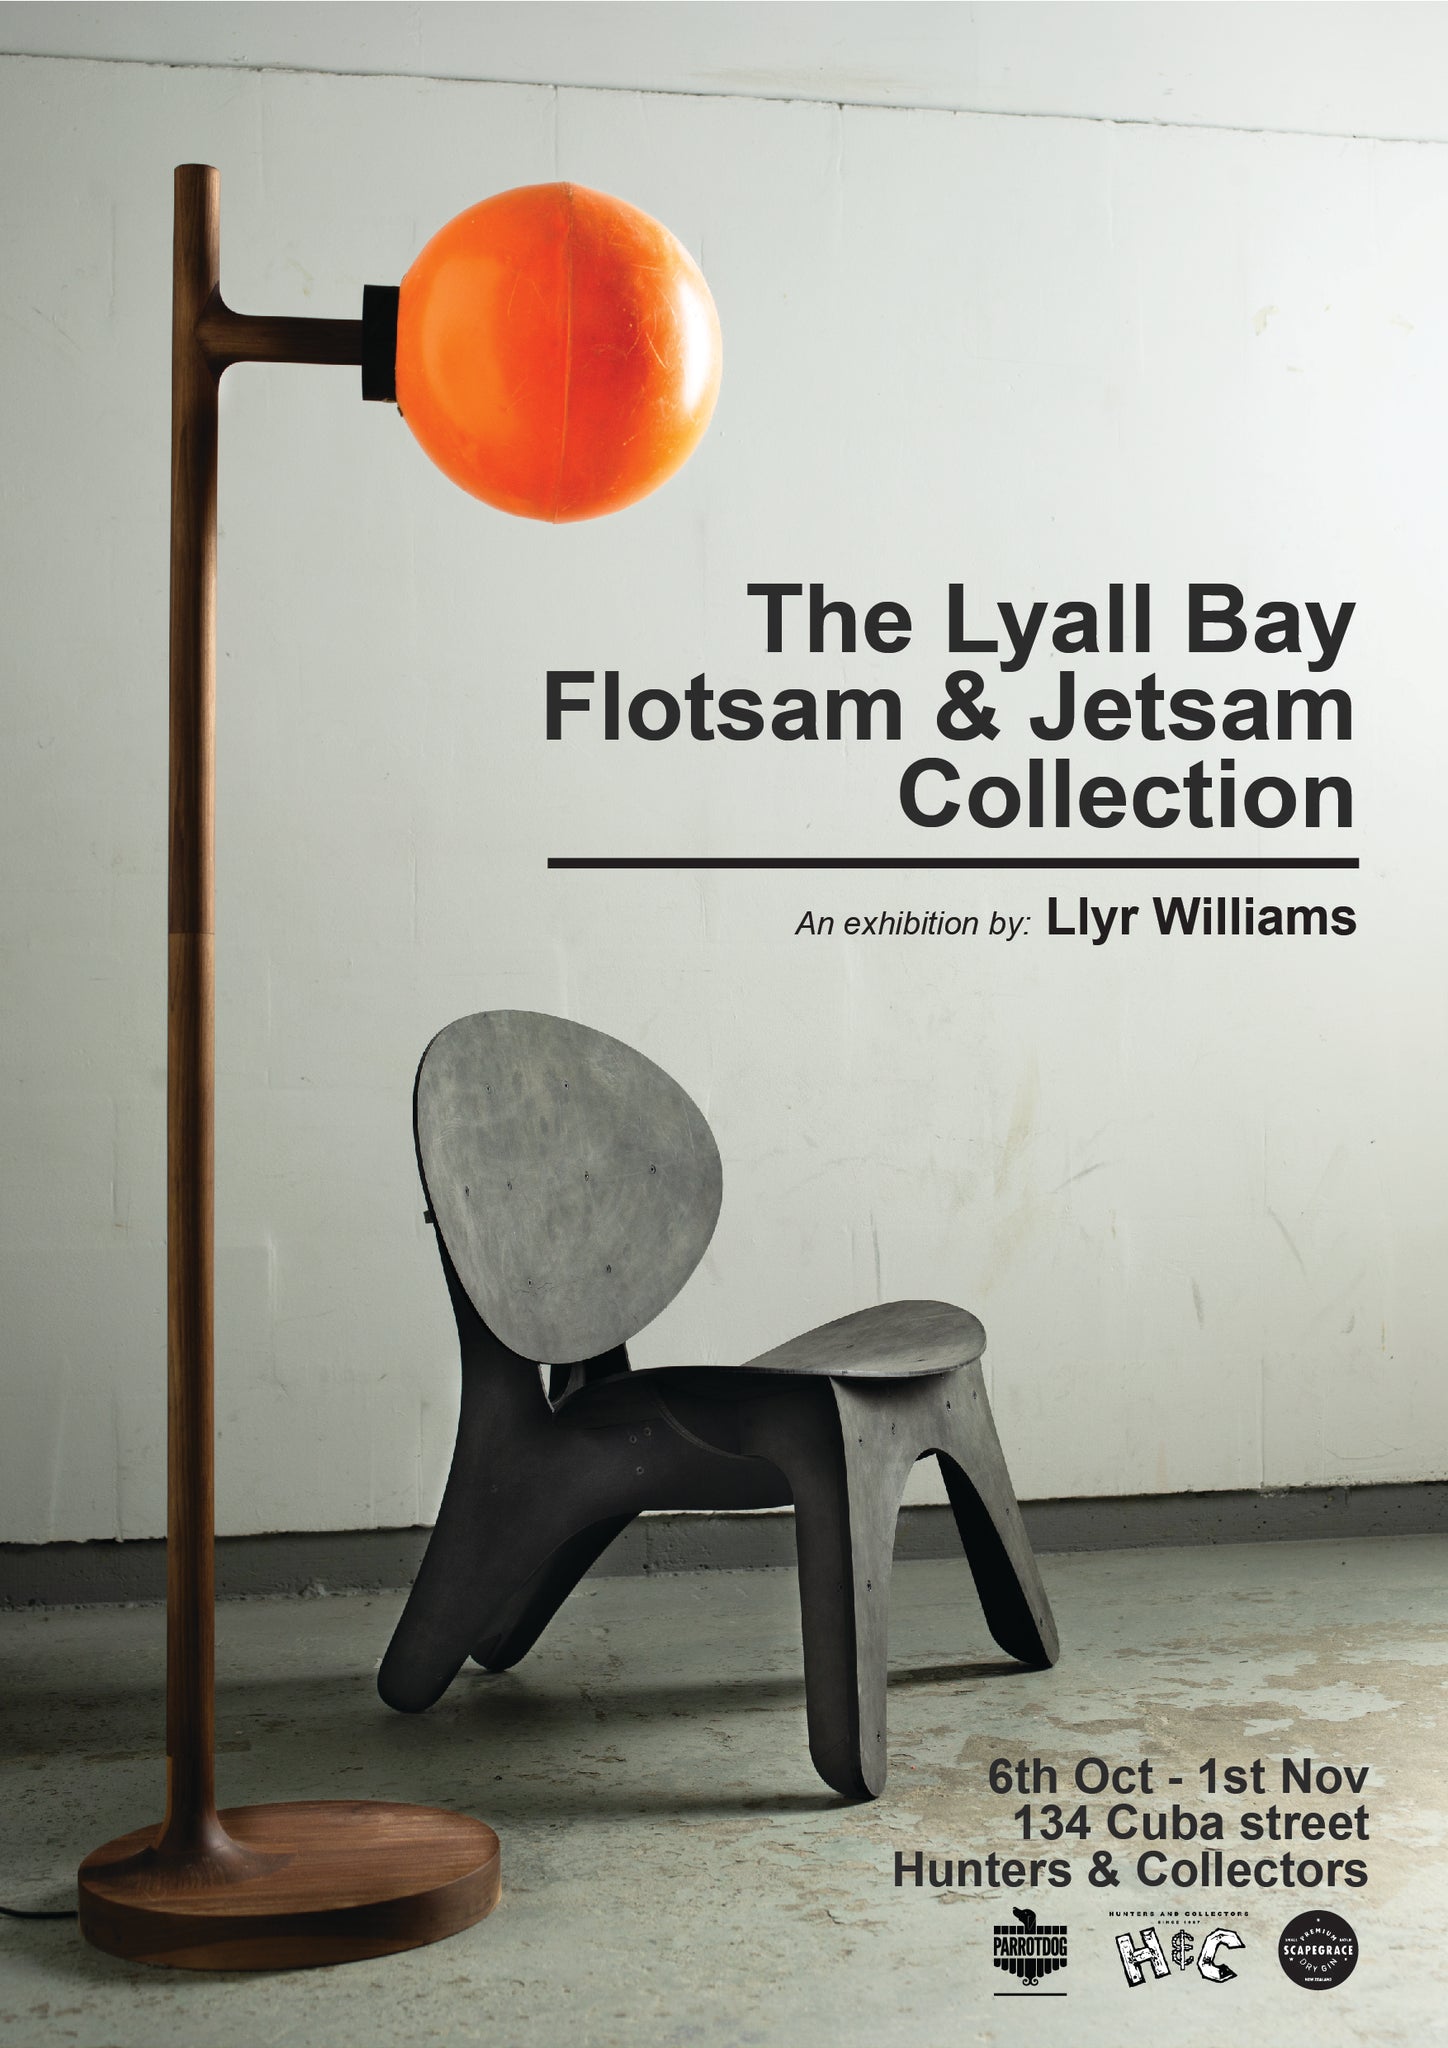 The Lyall Bay Flotsam and Jetsam collection by Llyr Williams